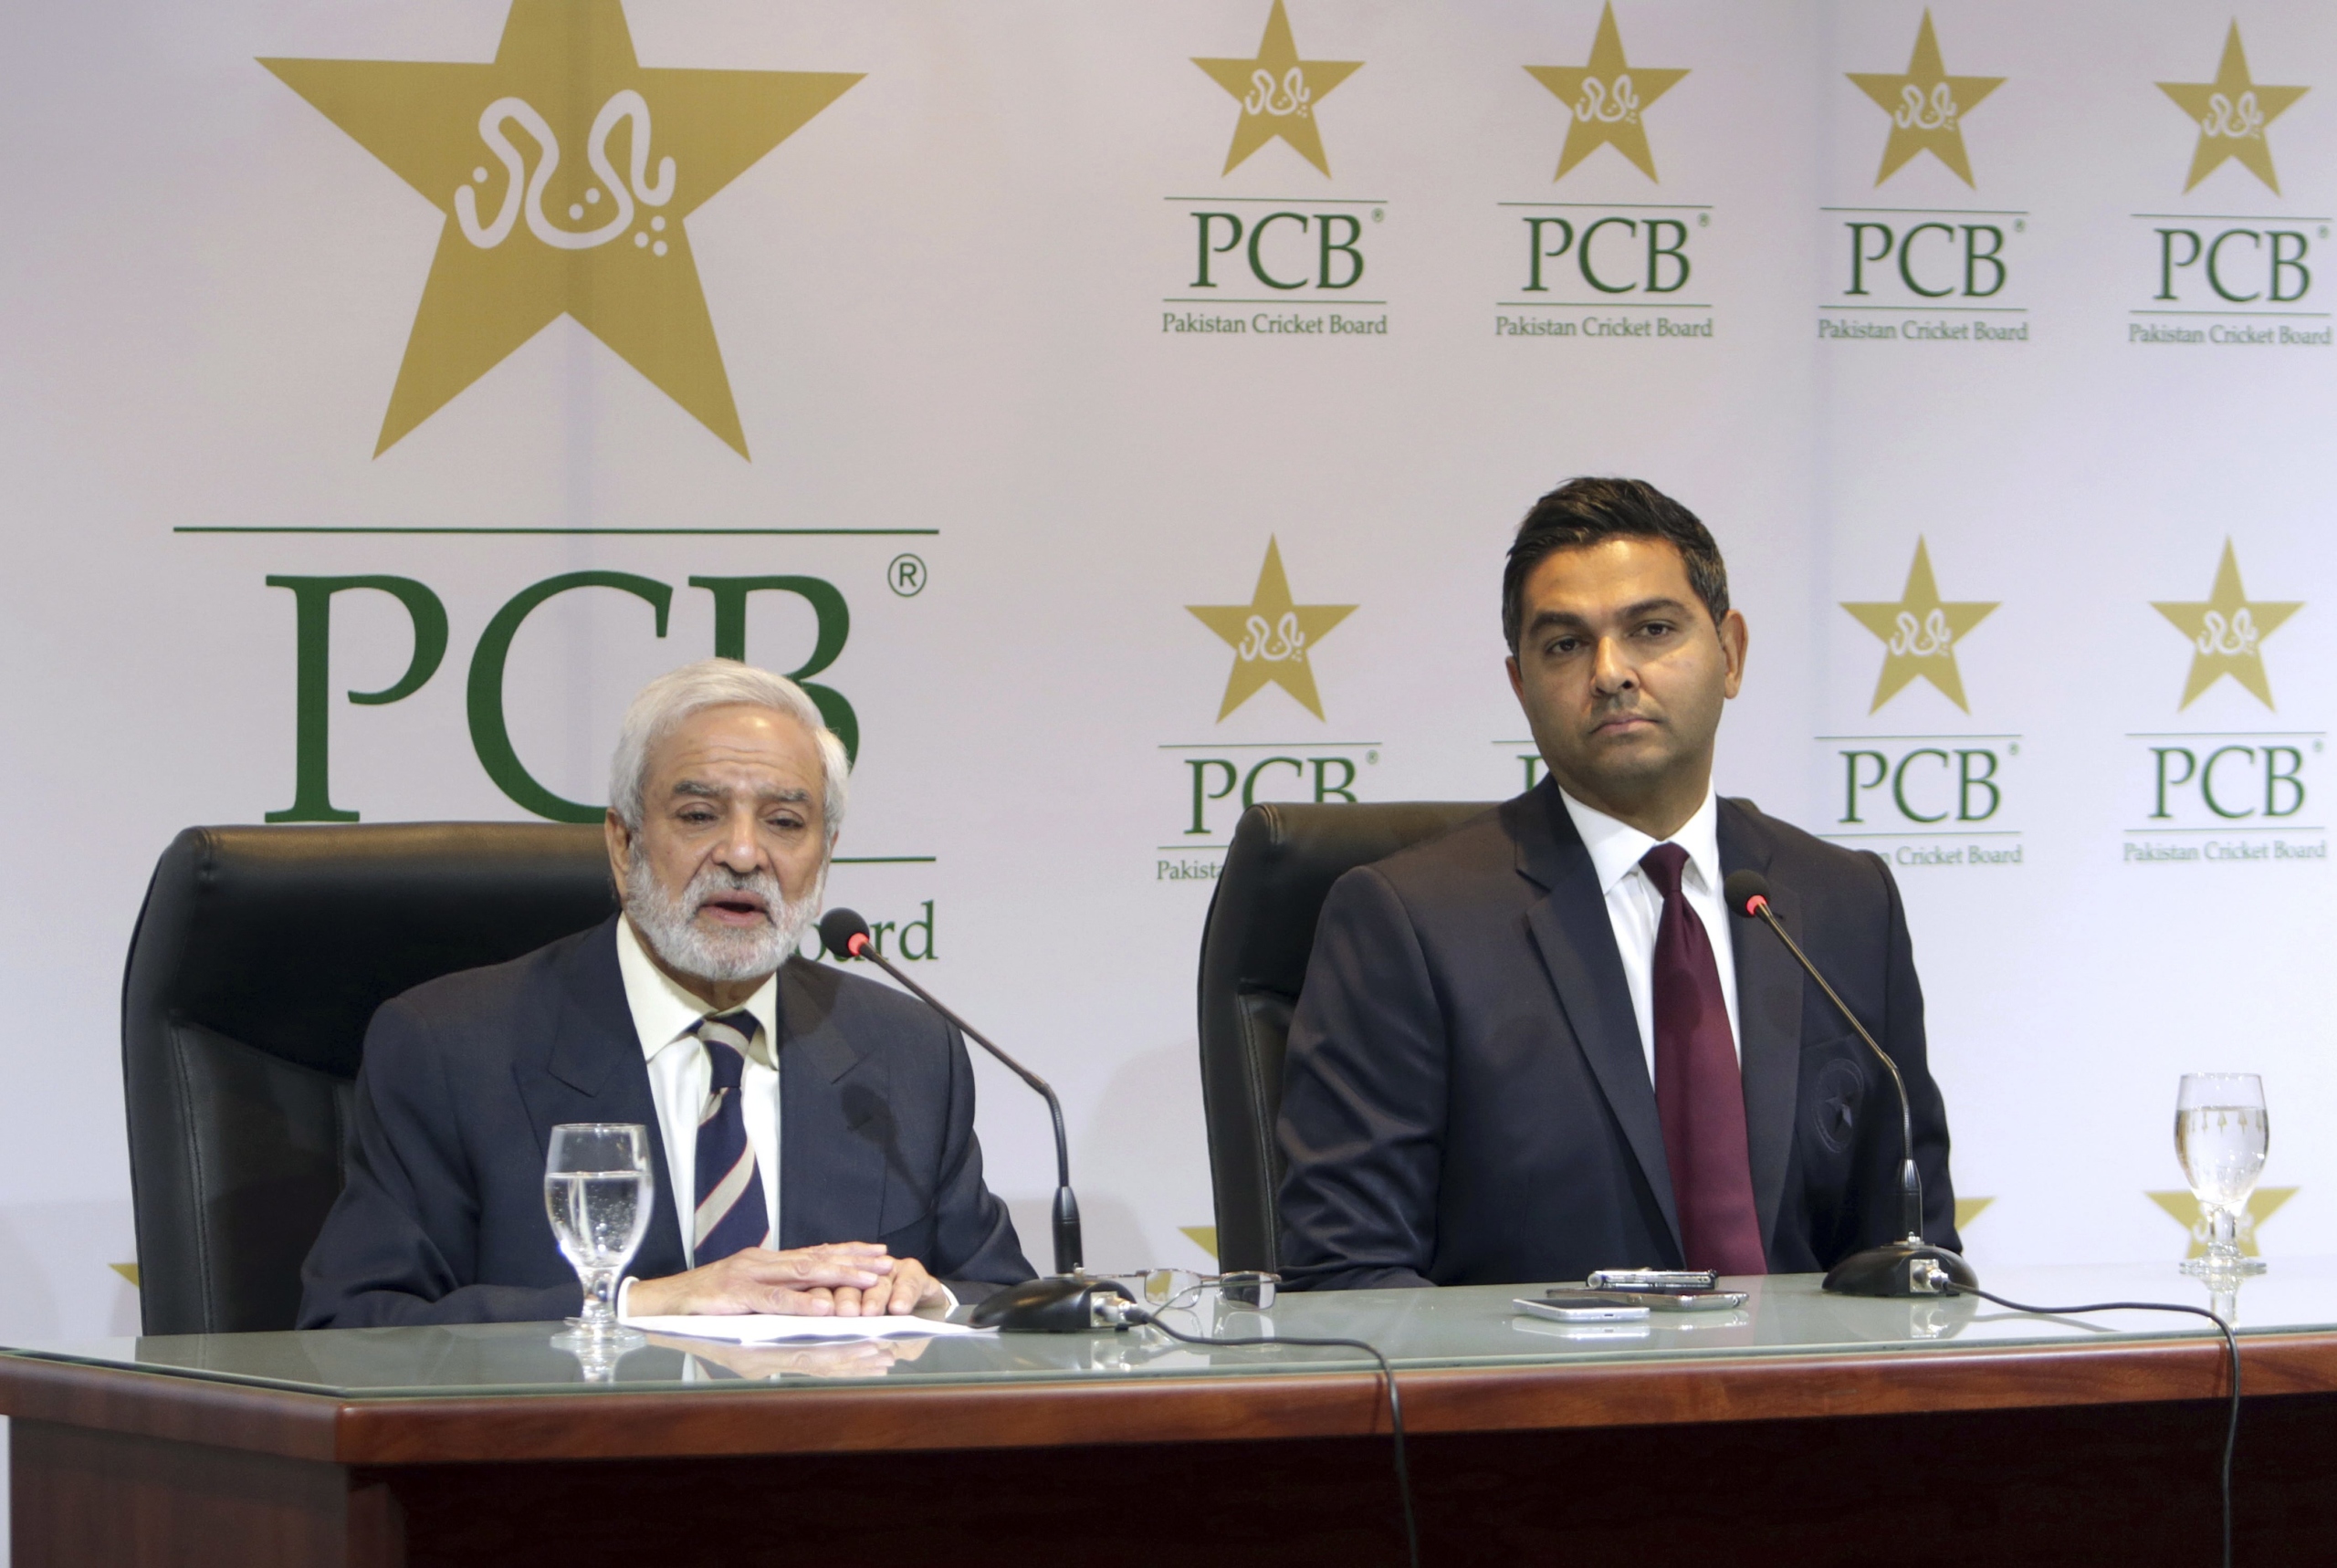 Our stance is clear: PCB not in favor of giving IPL a window over Asia Cup